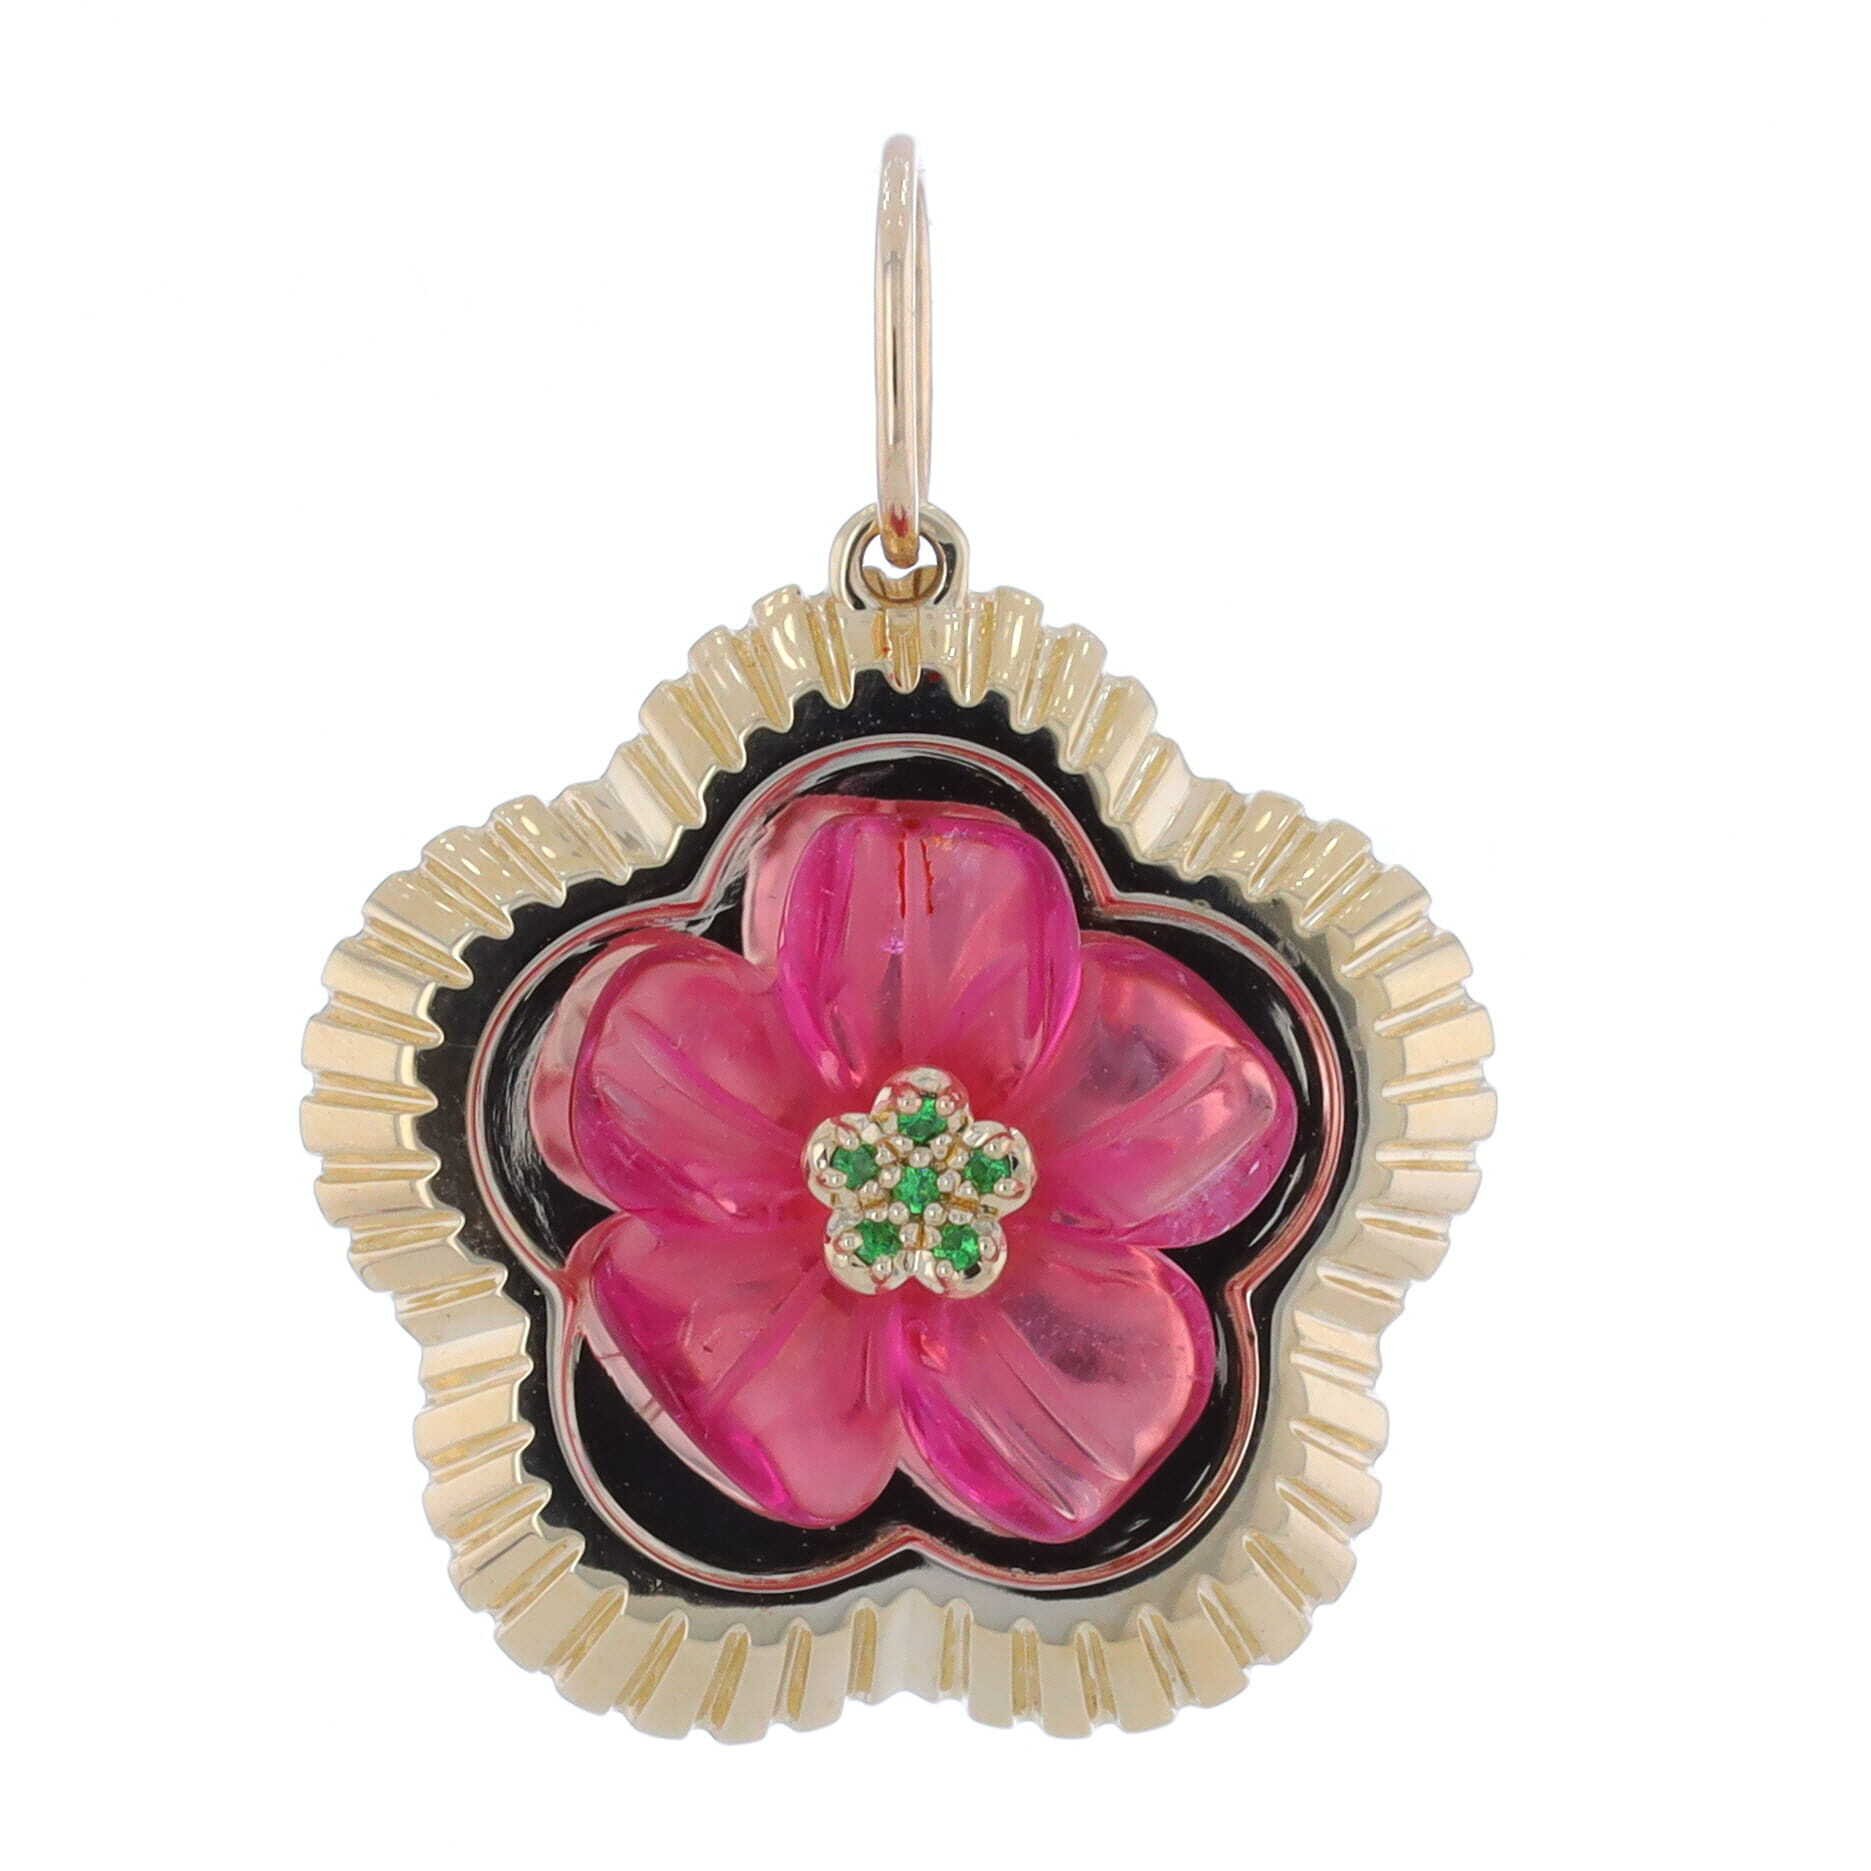 Pink Tourmaline Hand Carved Flower Decal with Green Tsavorite Center Mounted on a 14k Yellow Gold Backdrop Pendant Charm